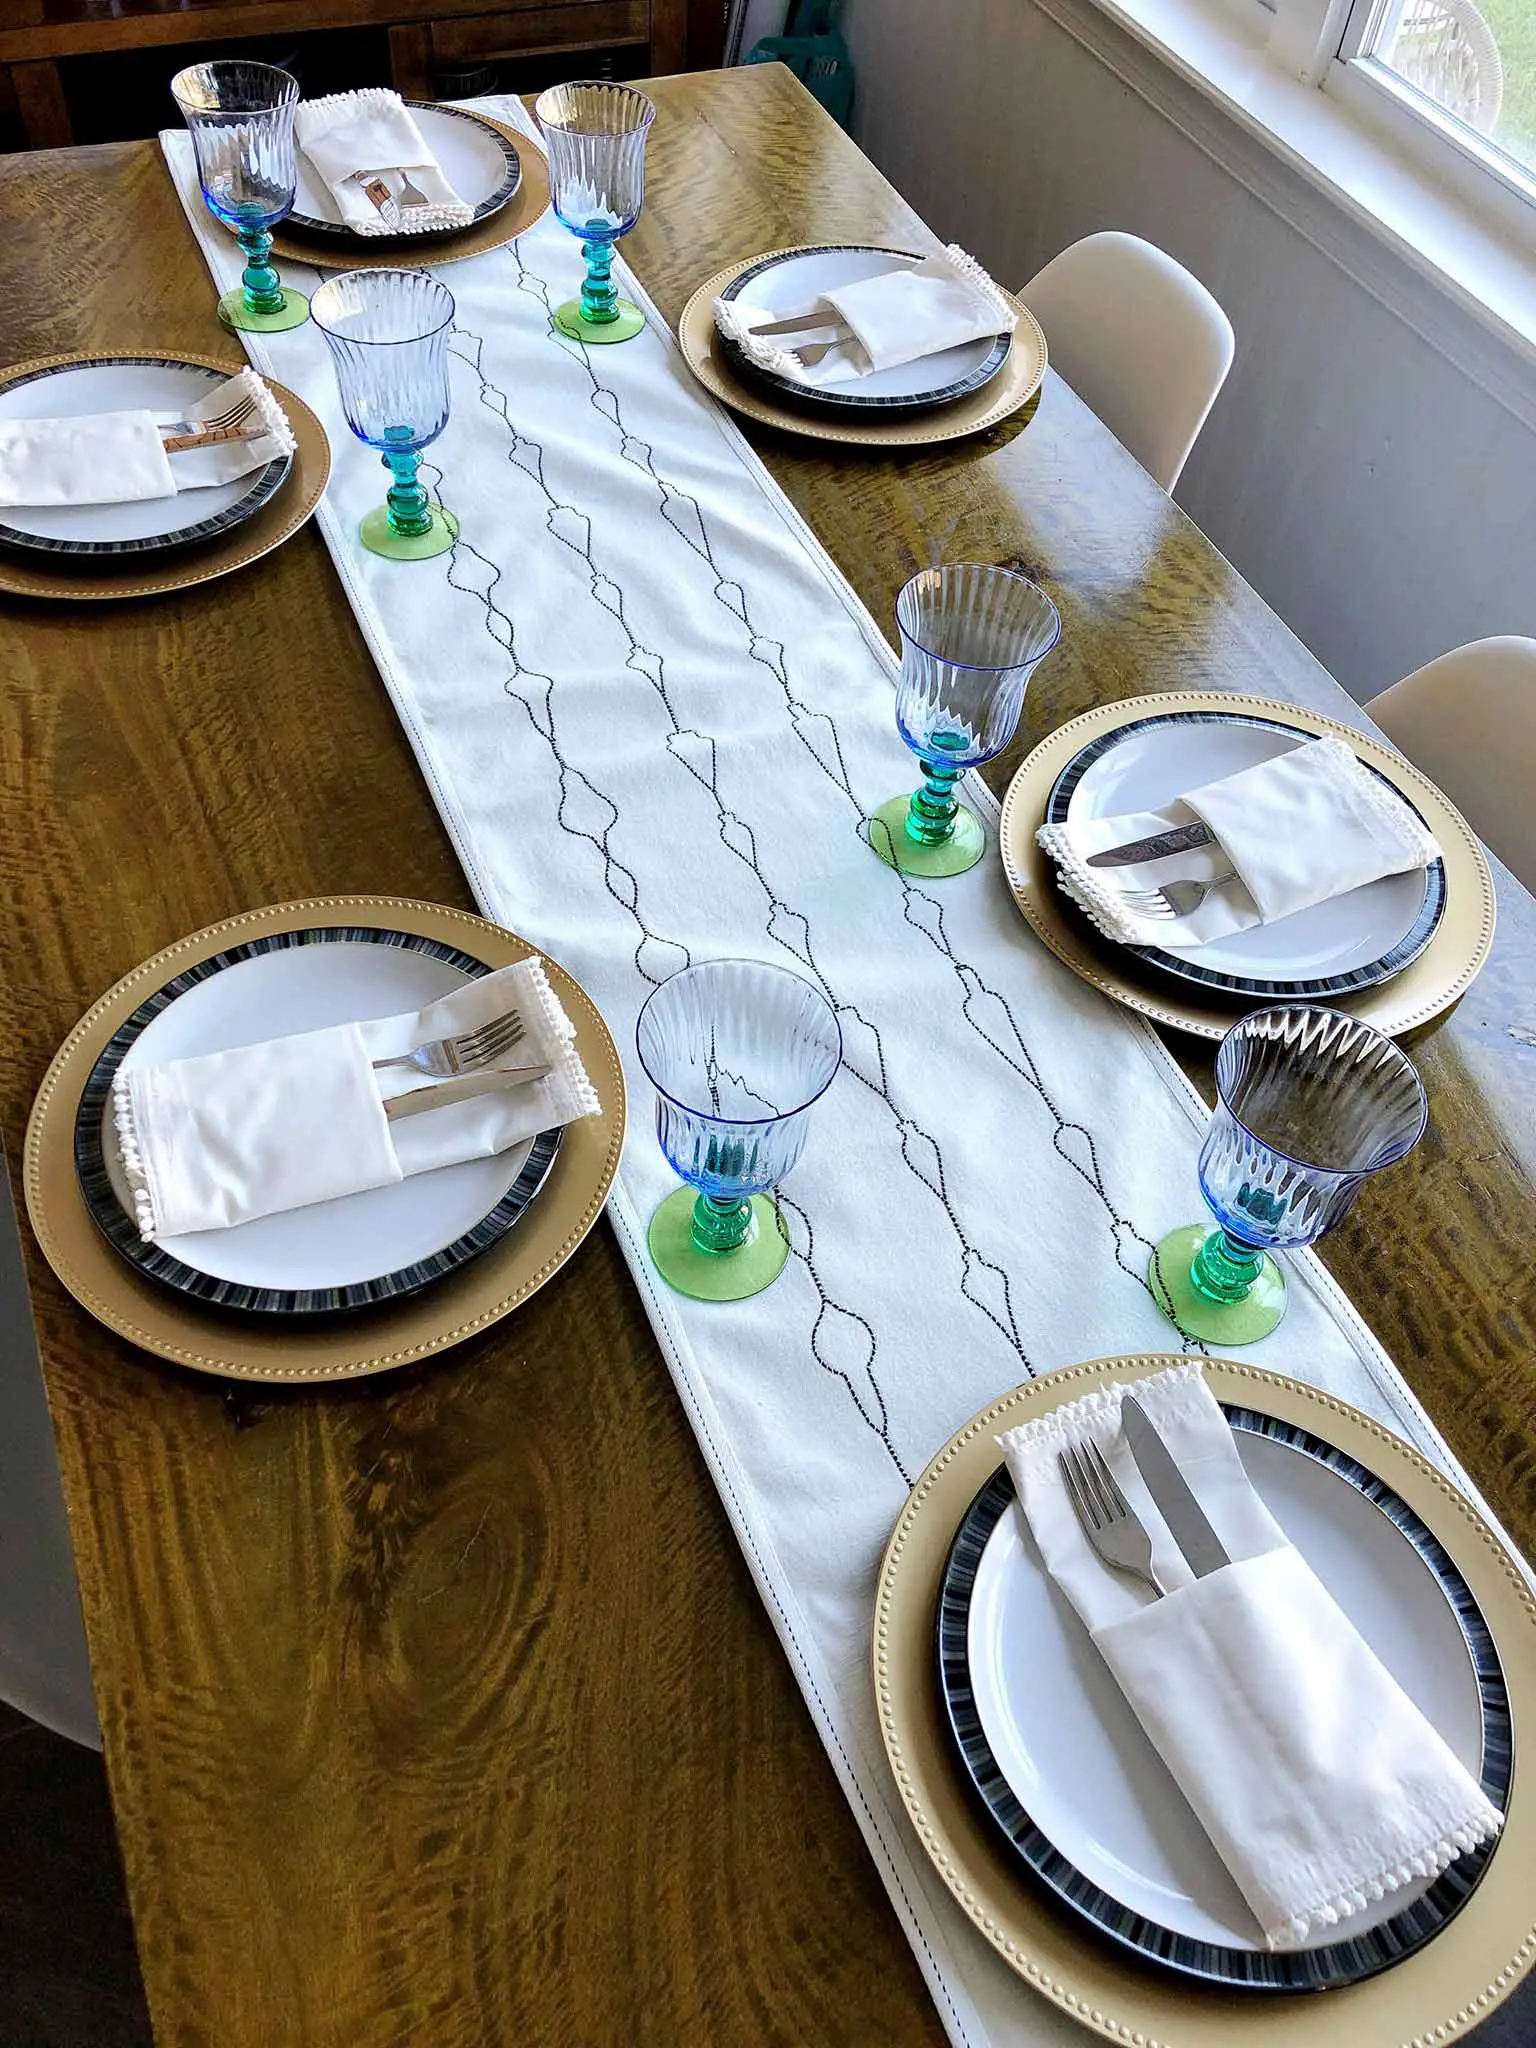 Adding dinnerware and glassware | How to Create a Beautiful Tablescape on a Budget | That Homebird Life Blog #christmasdecor #tablescape